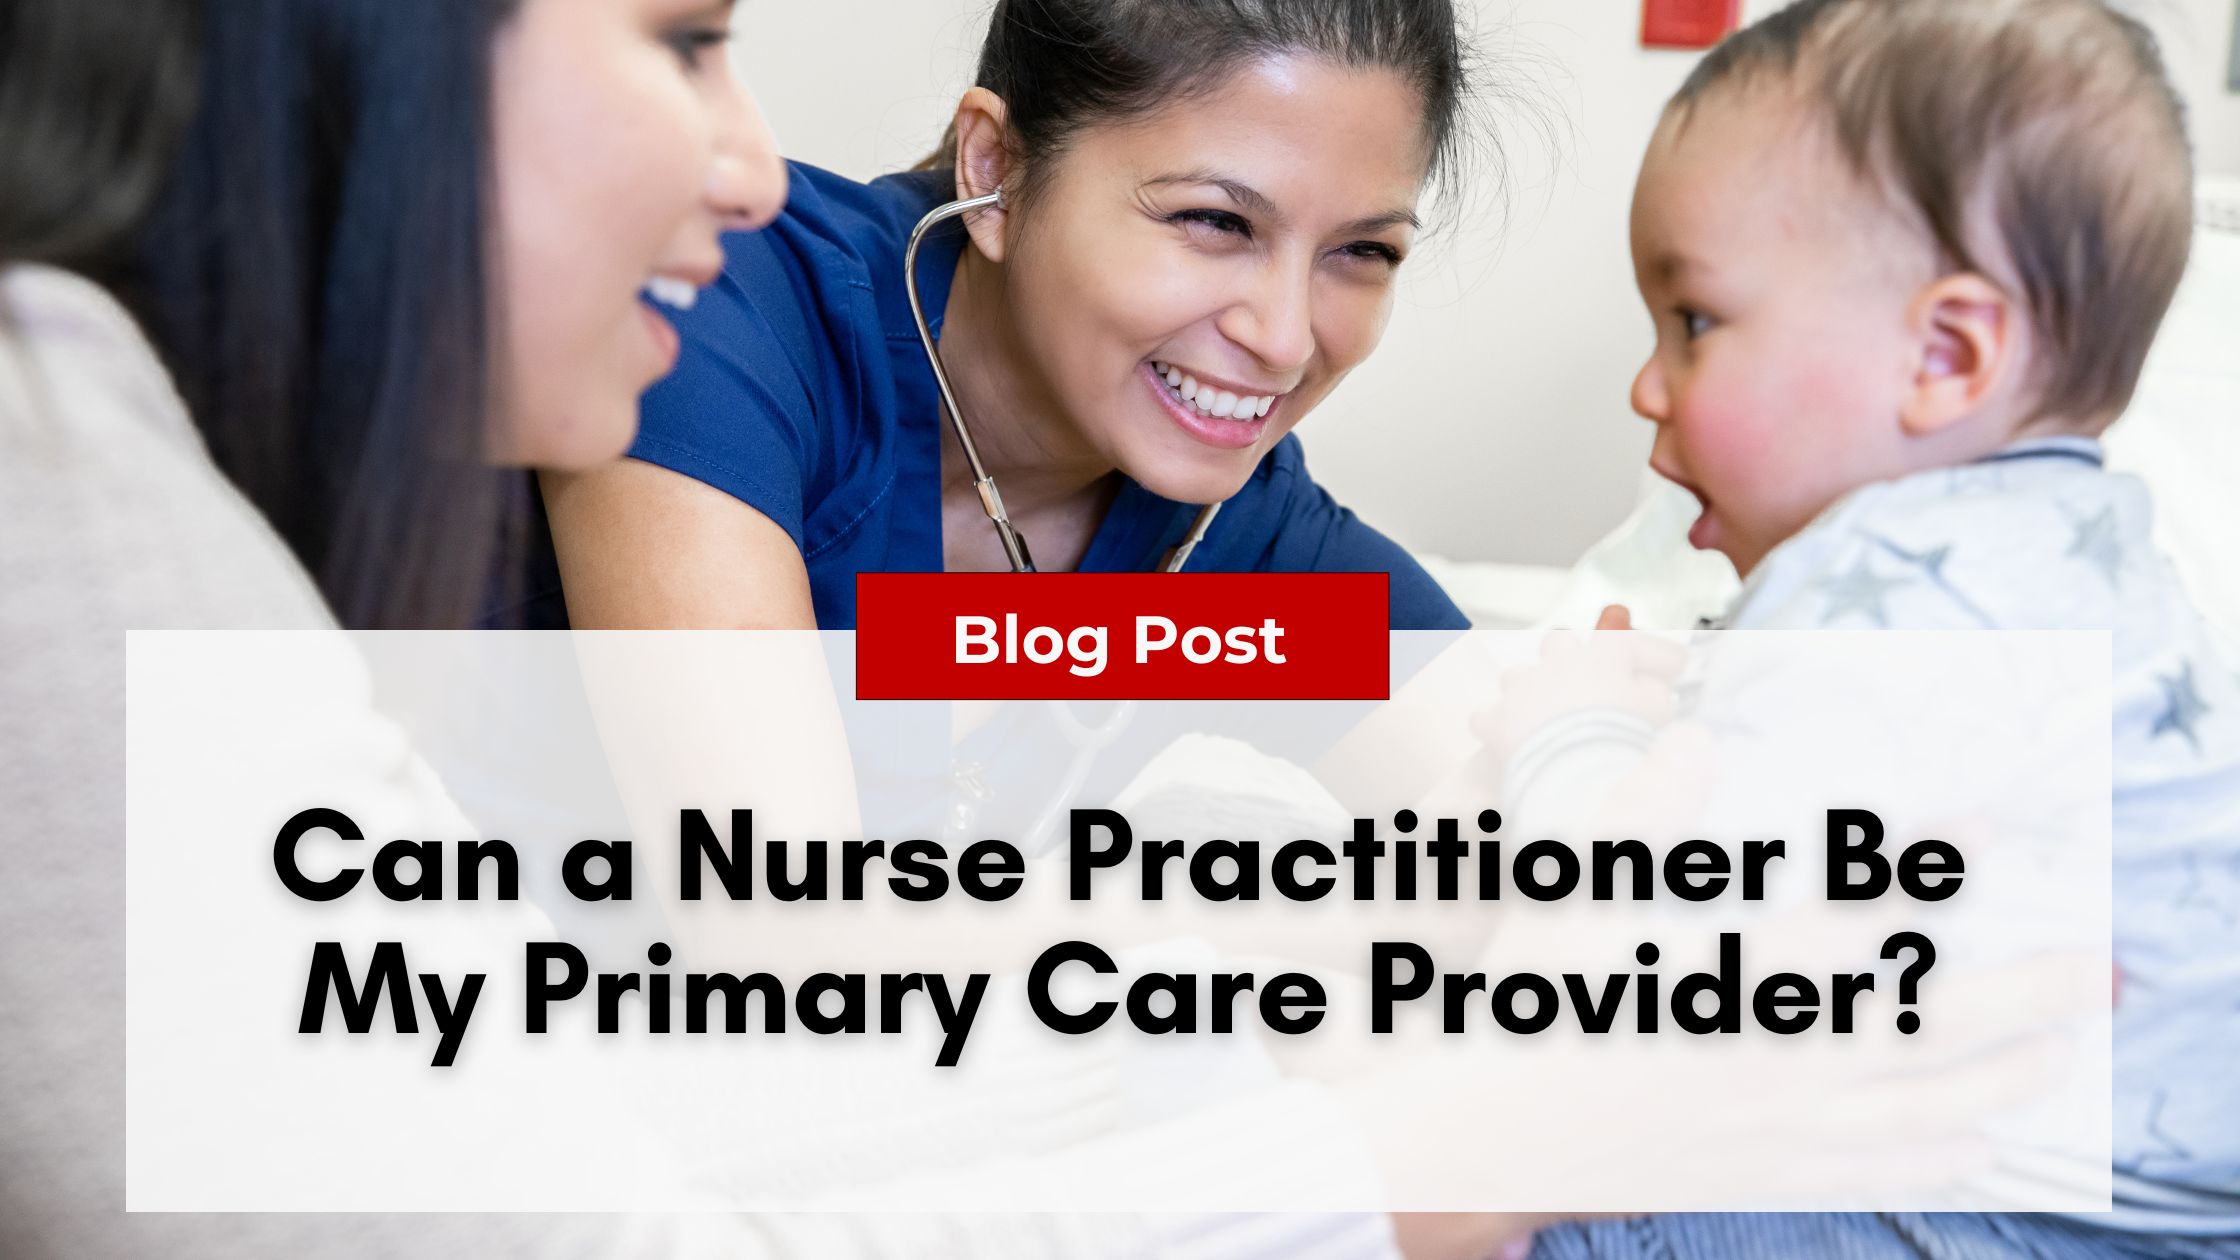 A nurse practitioner examines a baby while the baby's mother looks on, considering both their health and the well-being of healthcare providers. The text on the image reads, "Can a Nurse Practitioner Be My Primary Care Provider?" and highlights concerns like Nurse Practitioner Burnout.